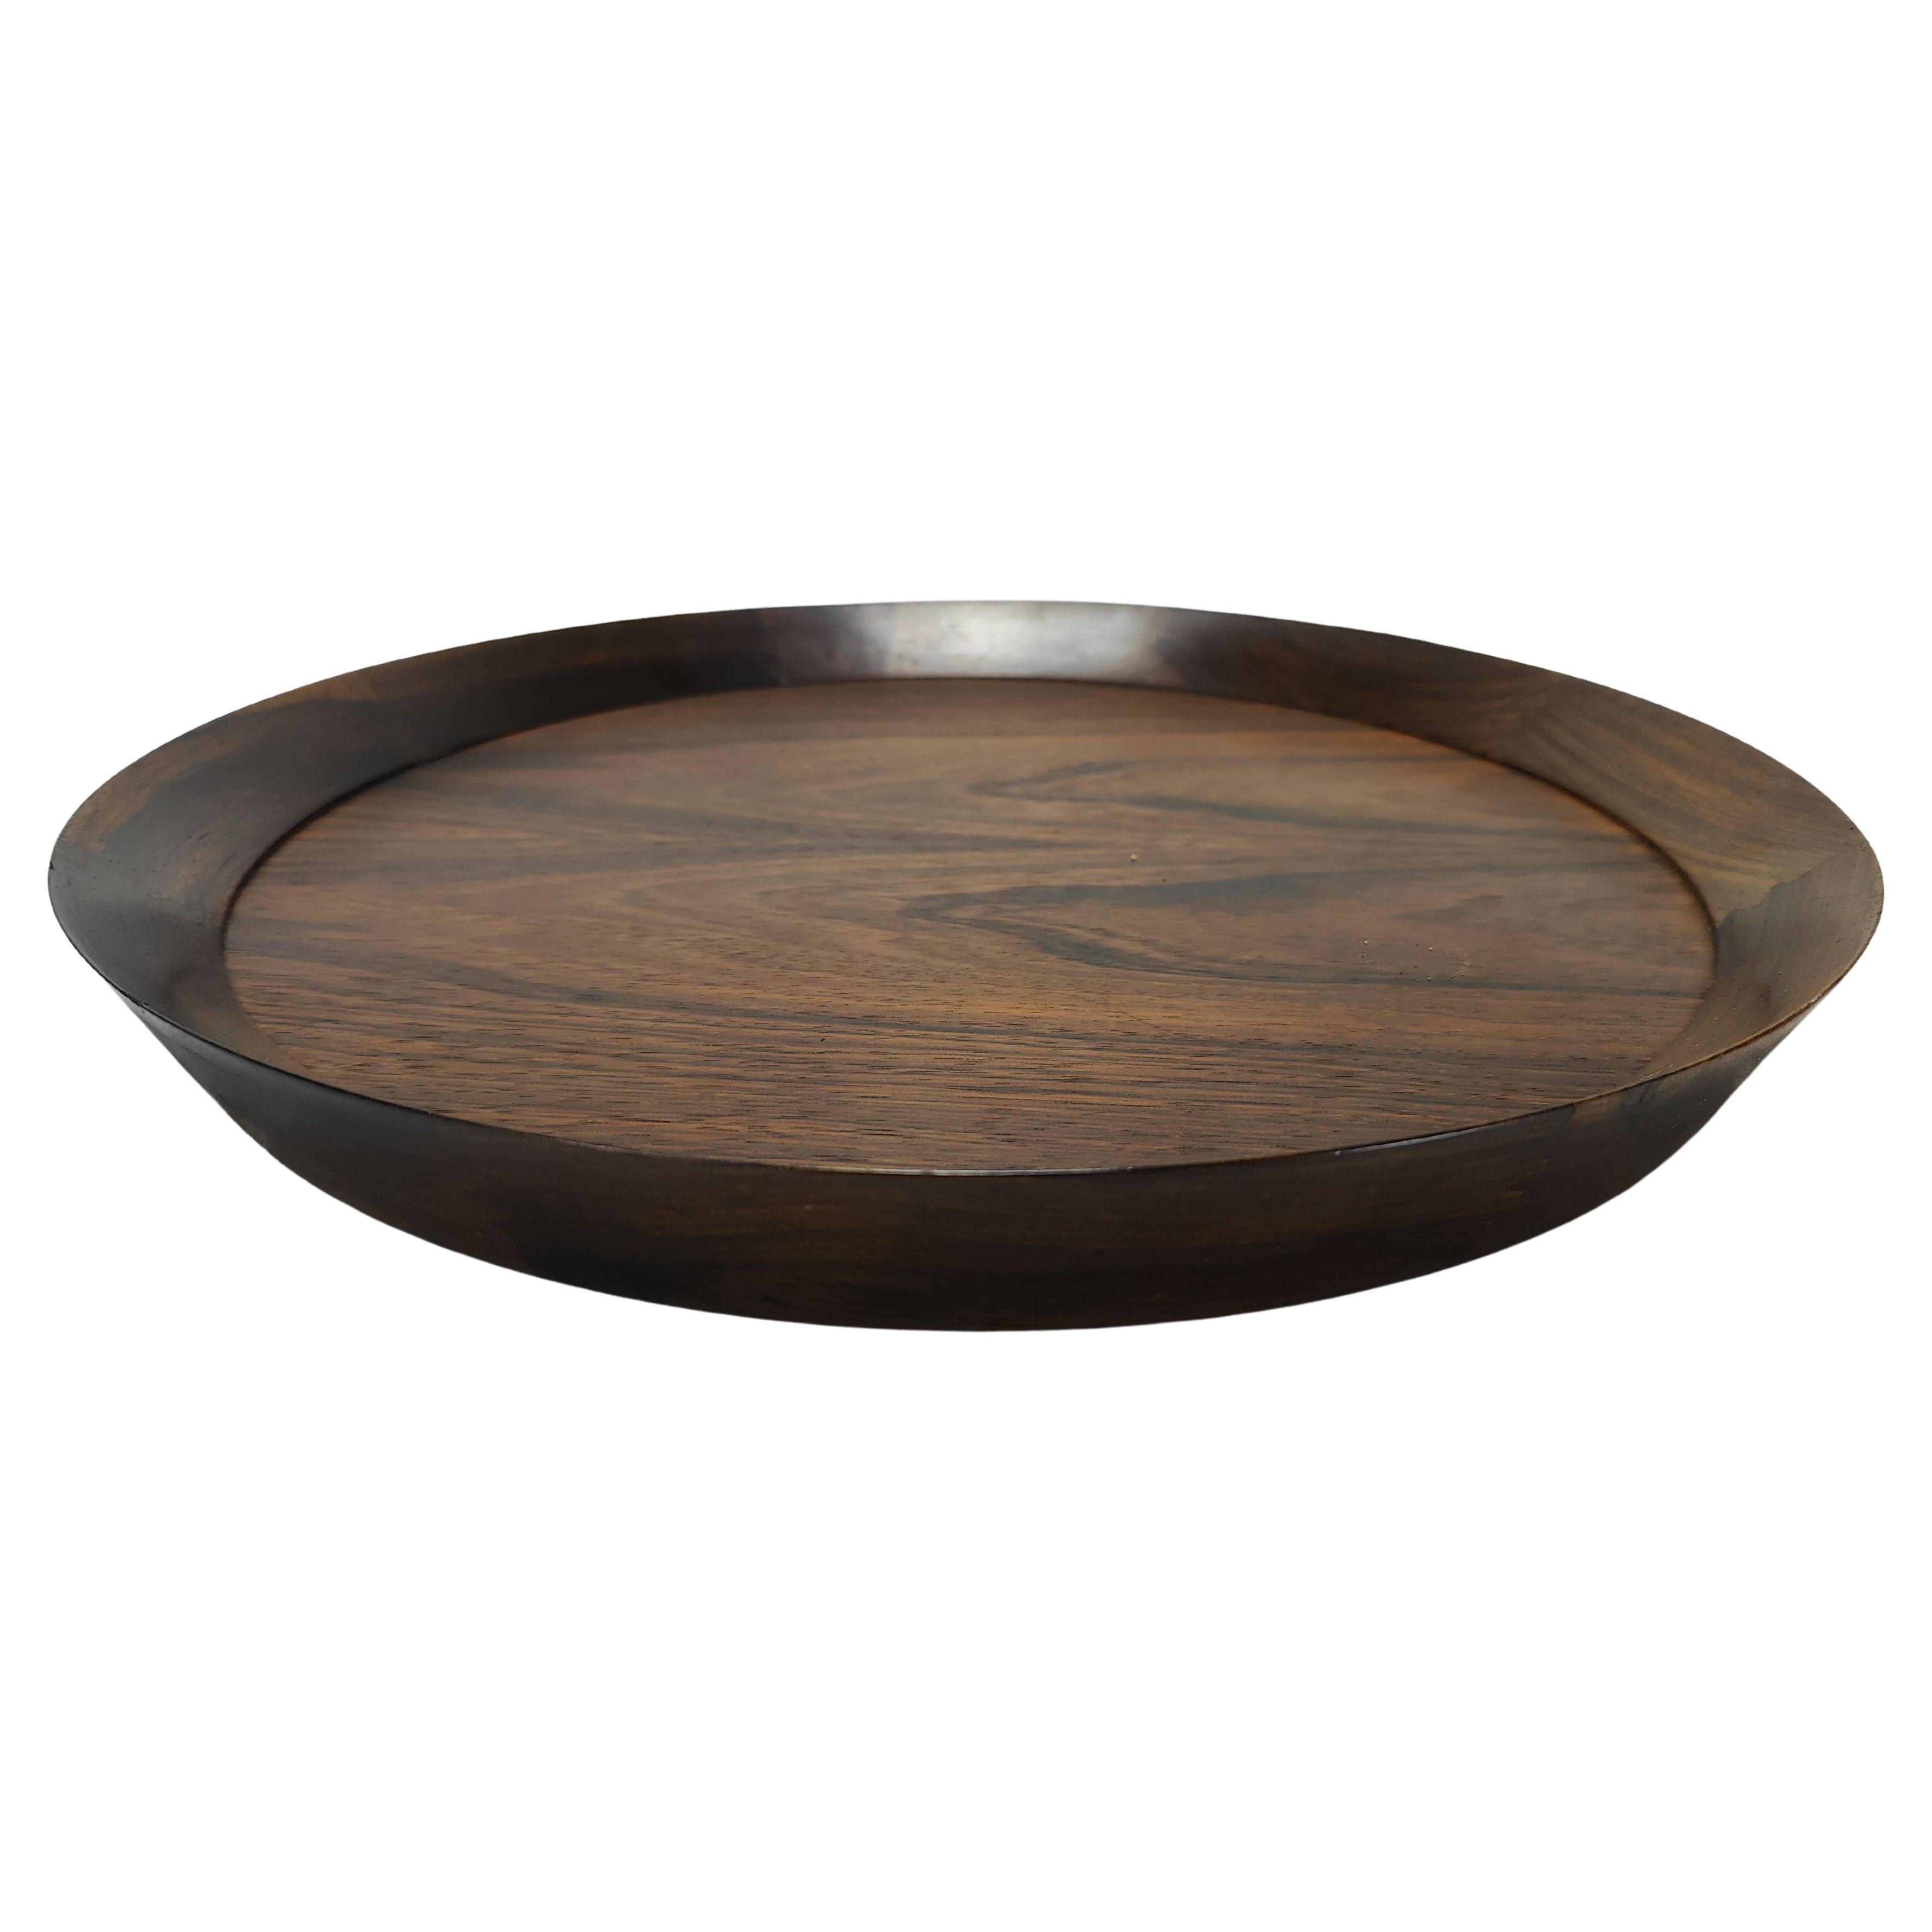 Vintage Mid-Century Modern Rosewood Serving Tray For Sale